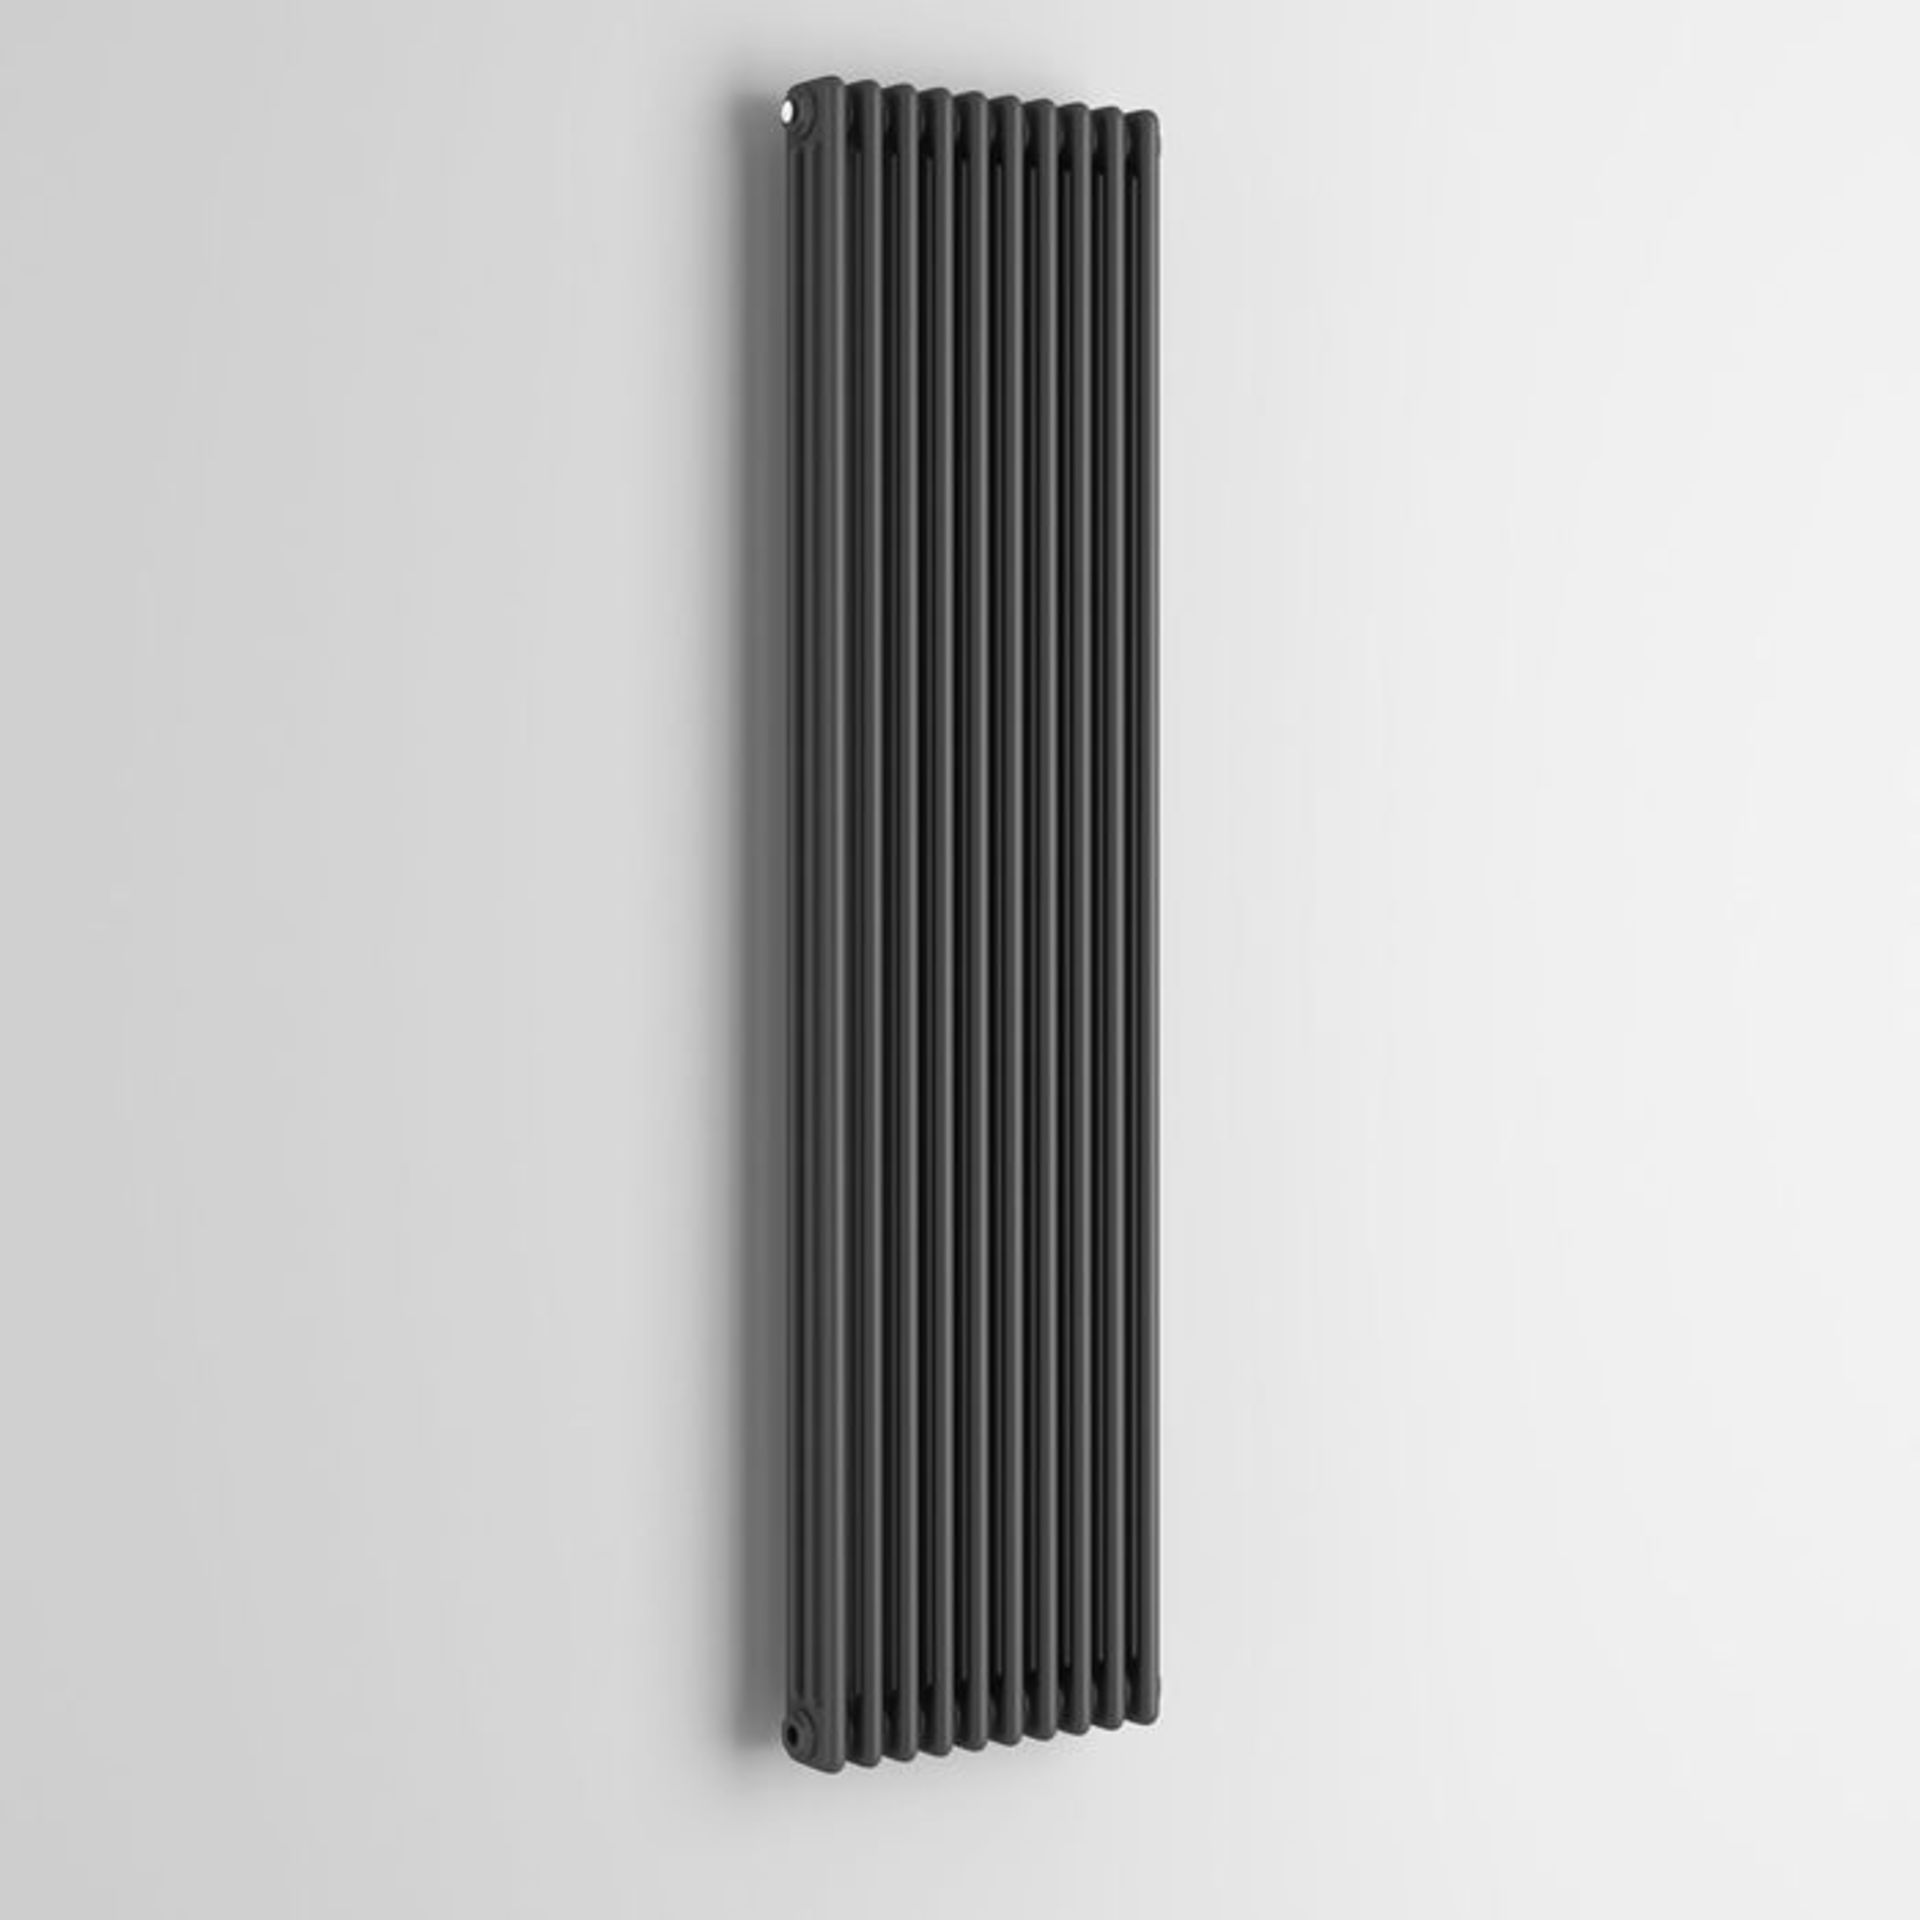 (AL127) 1800x468mm Anthracite Triple Panel Vertical Colosseum Traditional Radiator. RRP £499.99. - Image 4 of 4